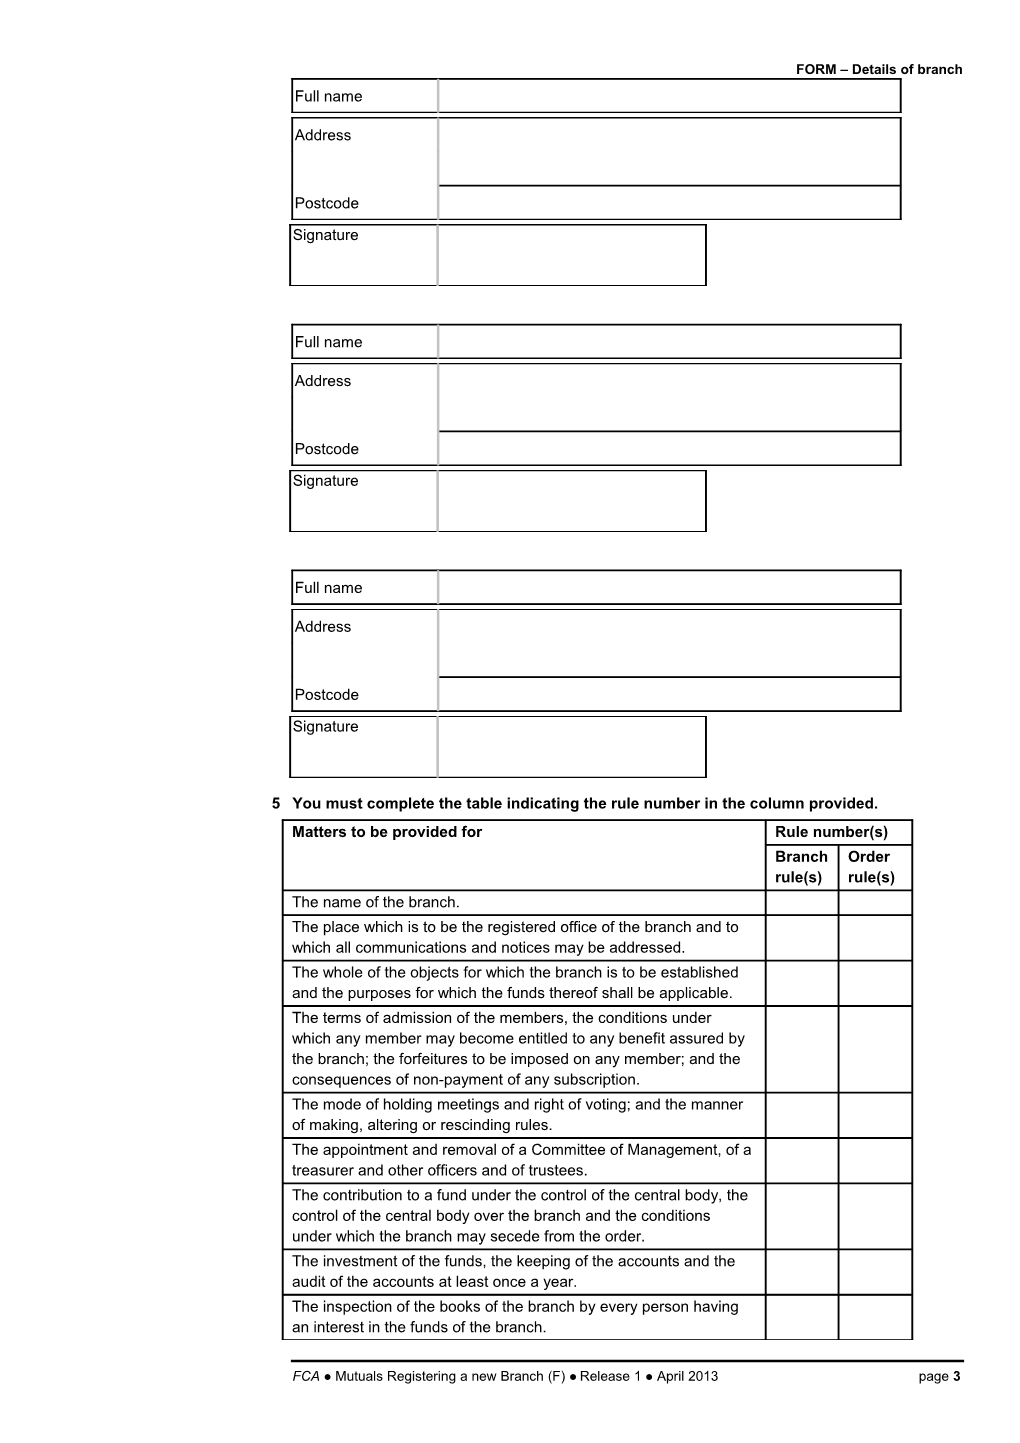 Mutuals Registration Forms